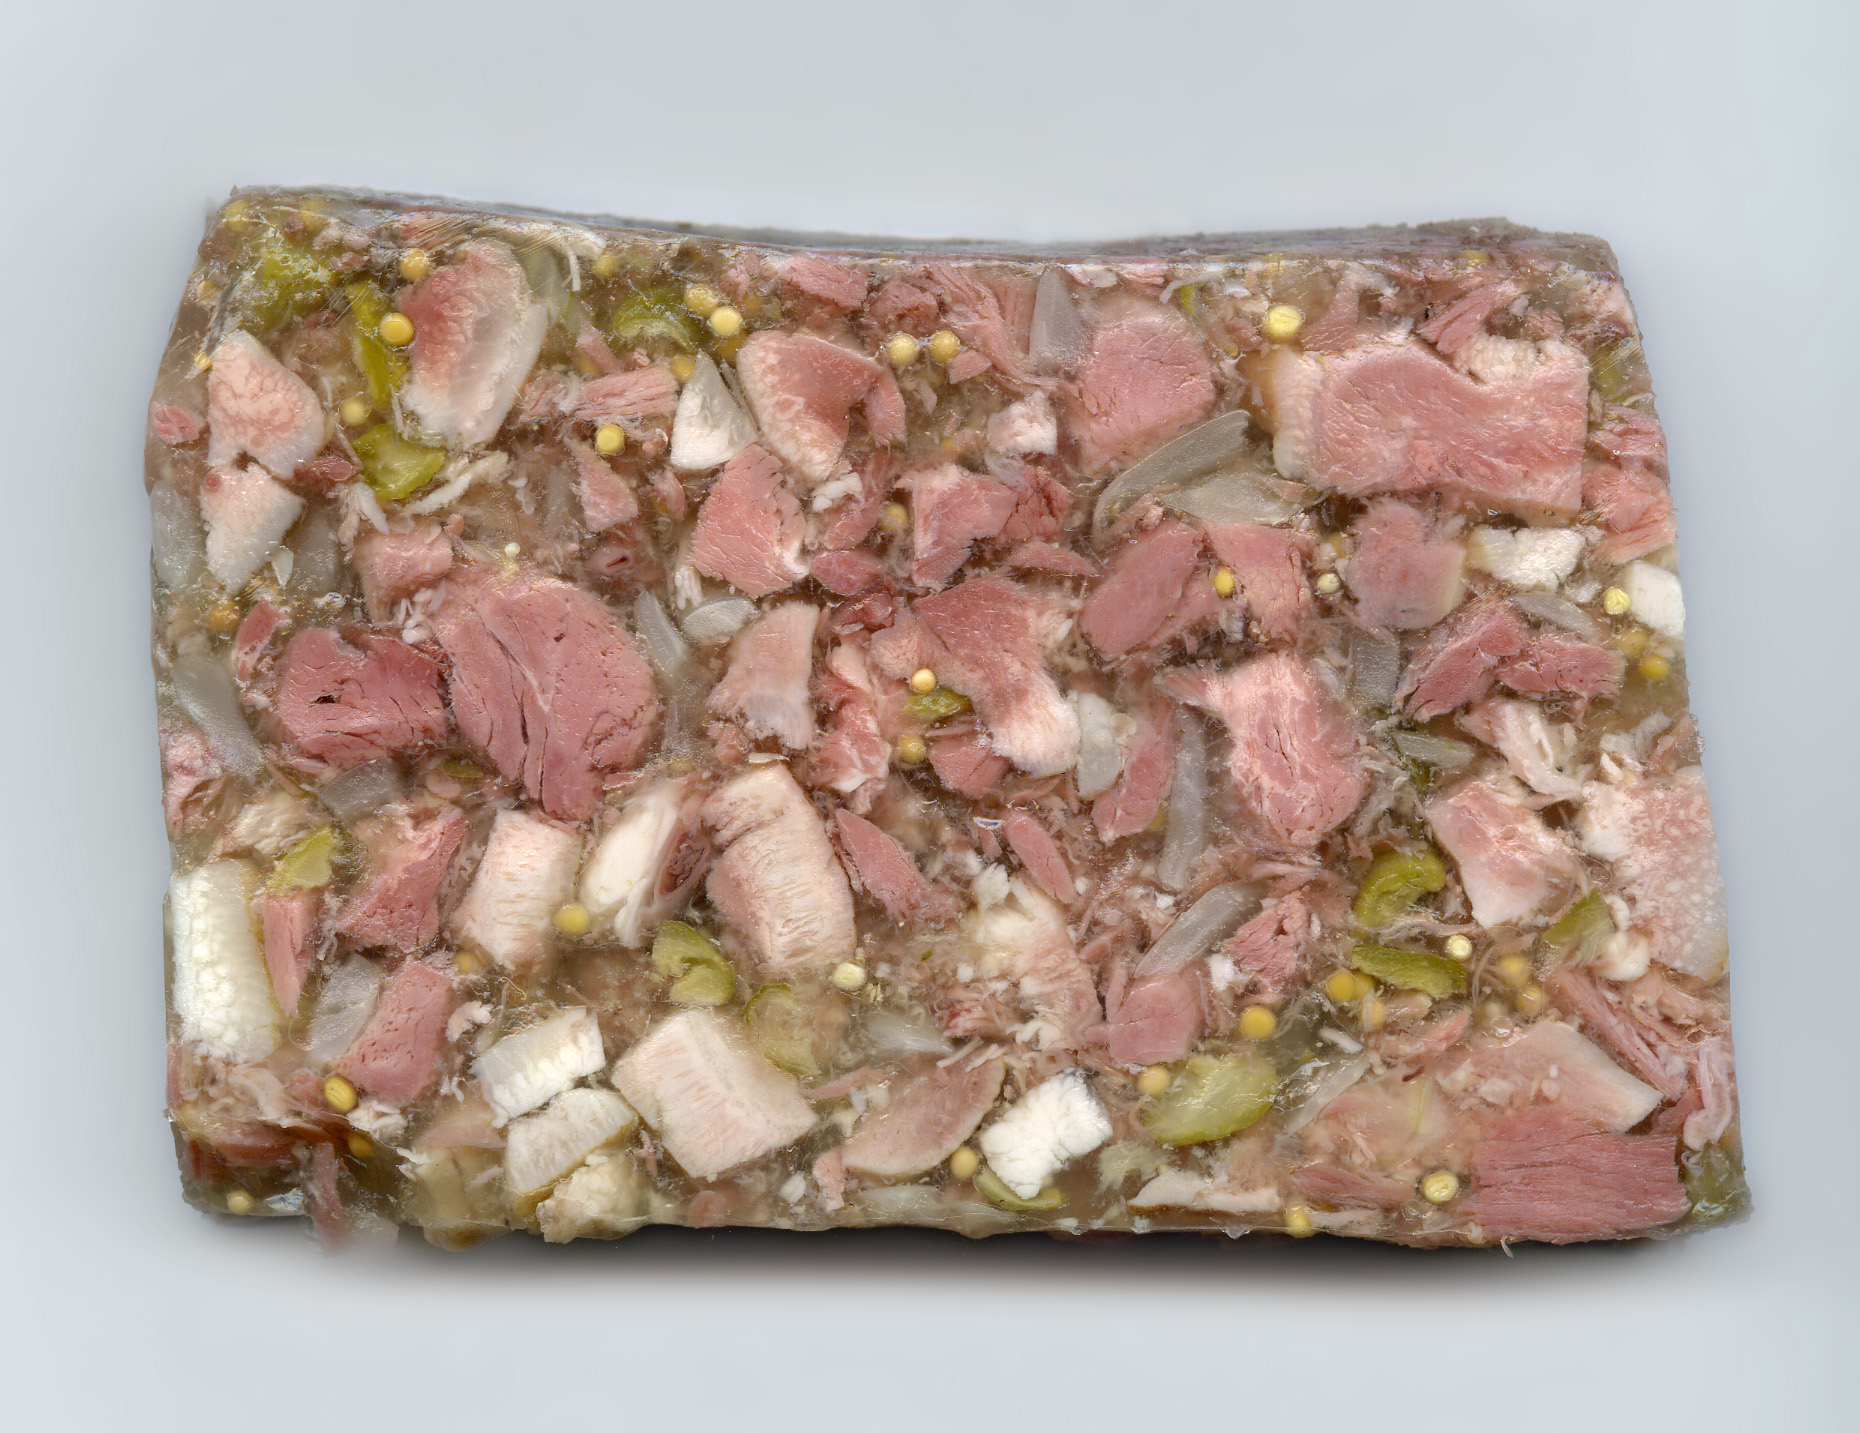 Discover the Traditional Ingredients Used in Making Delicious Head Cheese